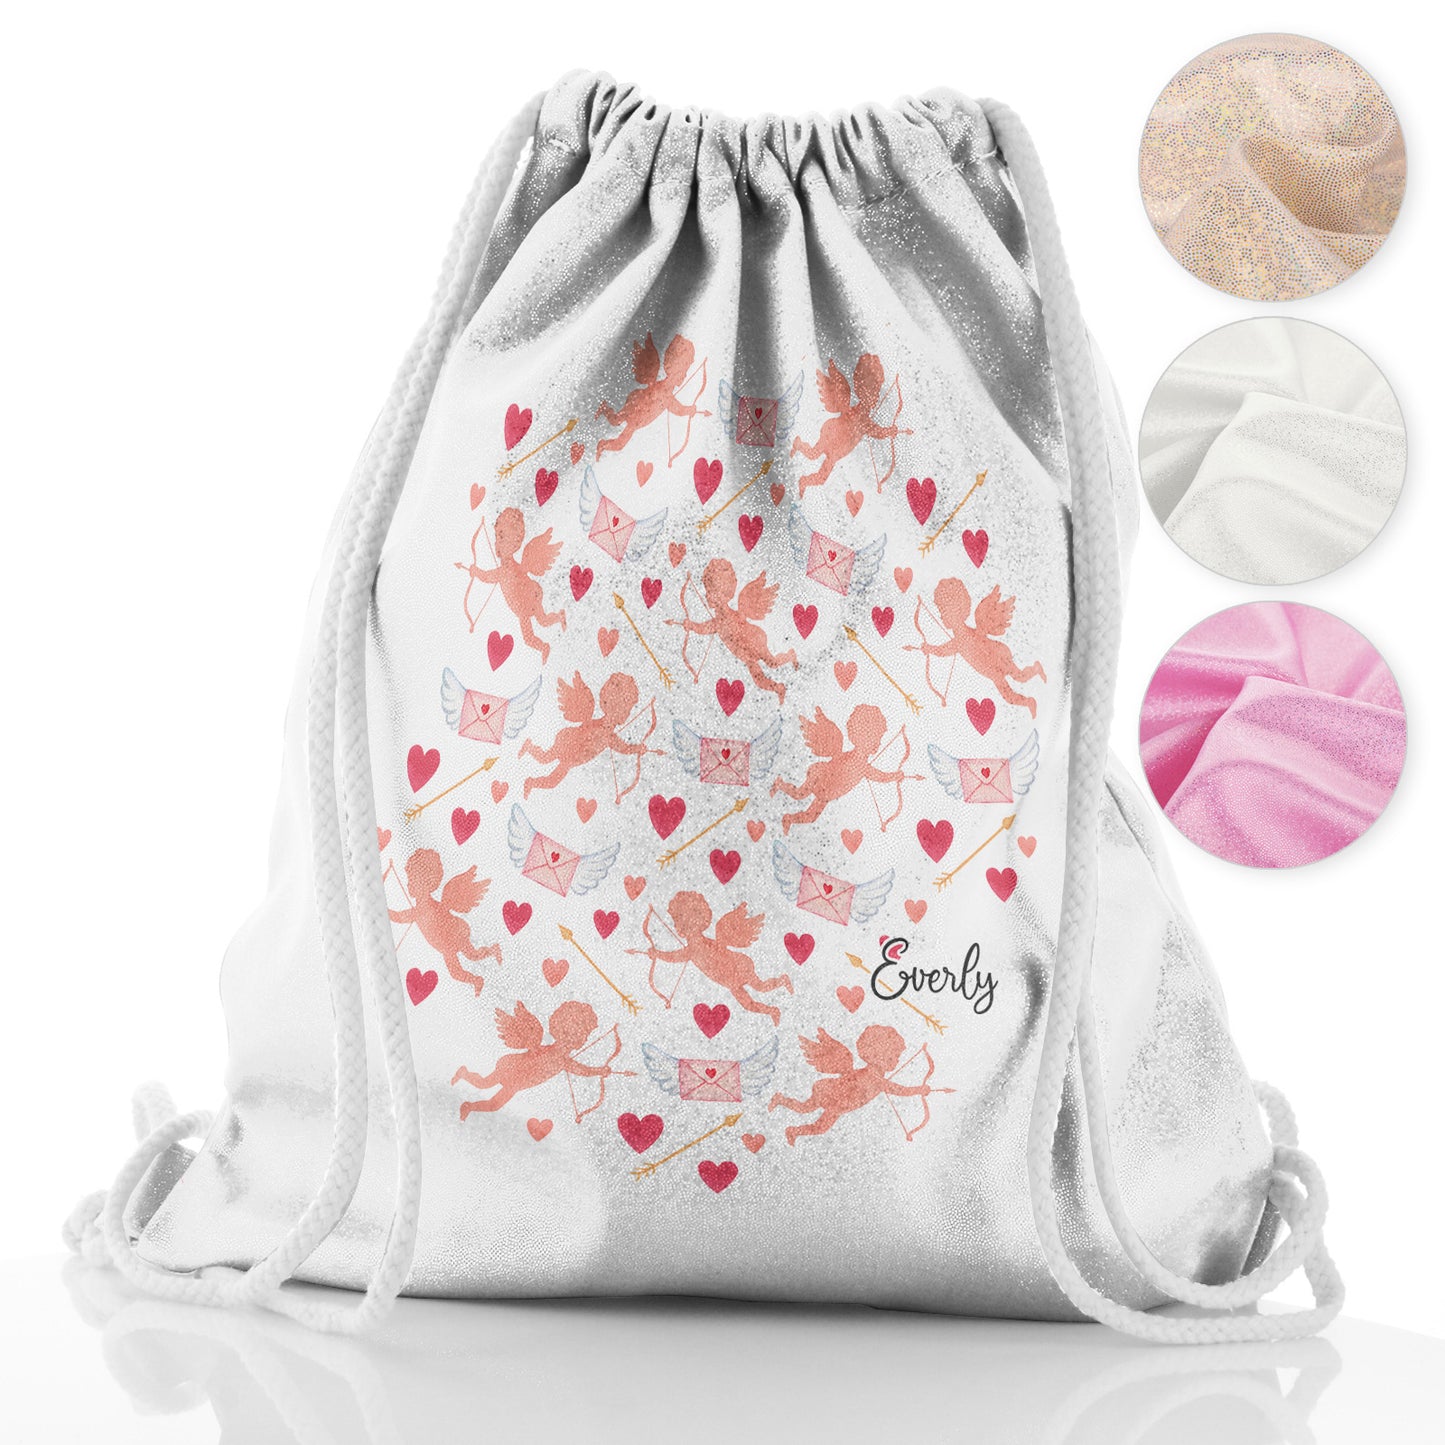 Personalised Glitter Drawstring Backpack with Stylish Text and Cupid Hearts Print